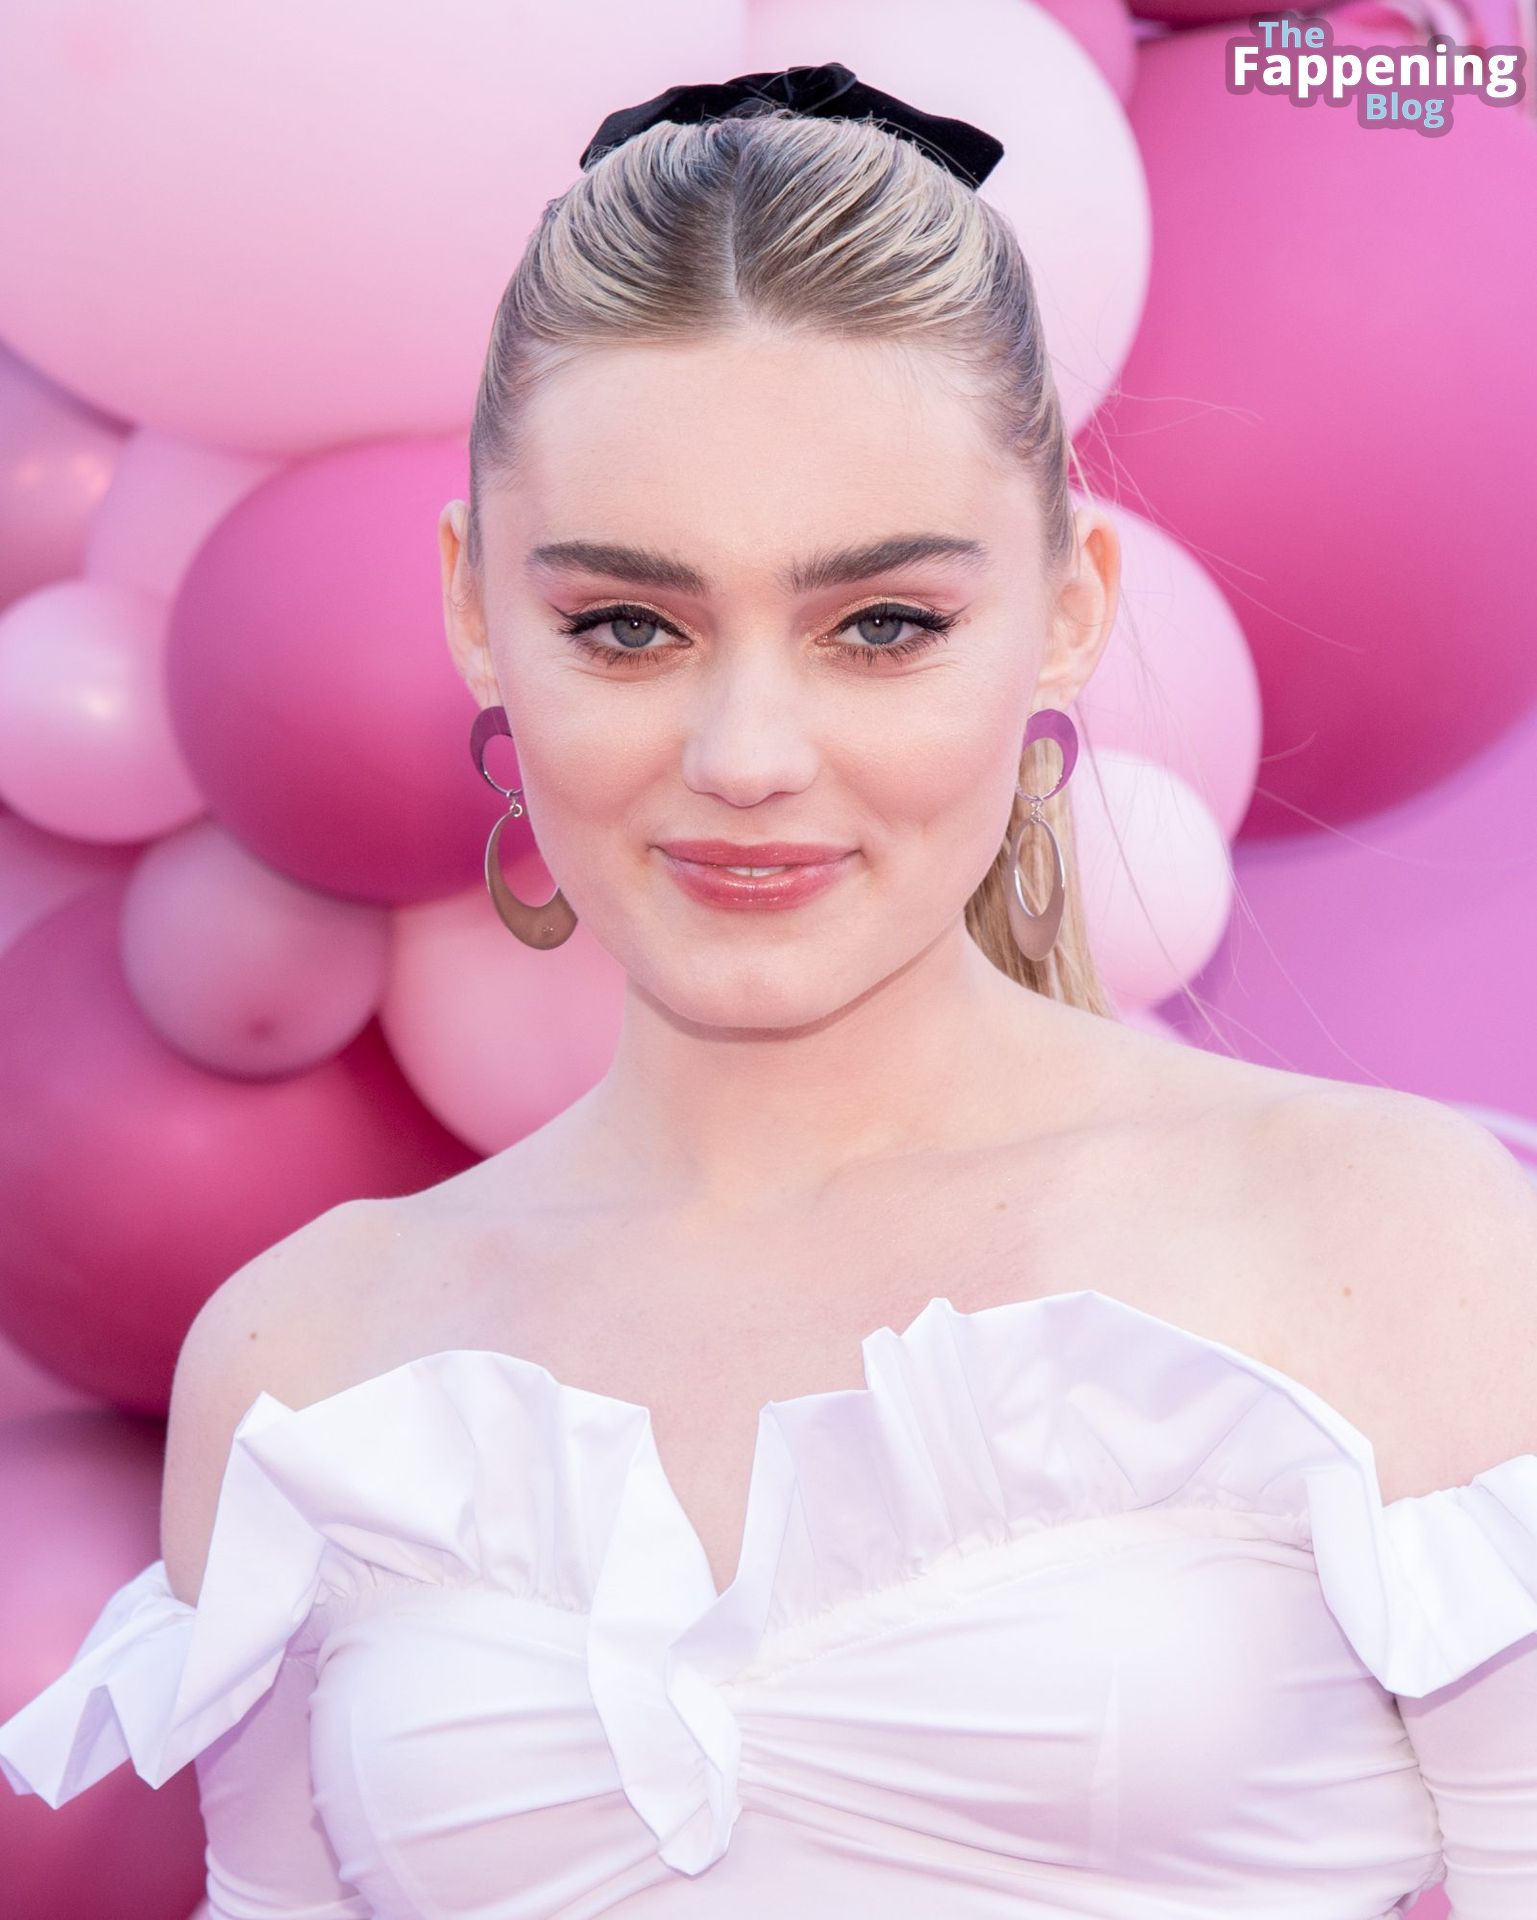 Meg Donnelly Flaunts Her Sexy Figure at the “Prom Pact” Premiere in LA (24 Photos)